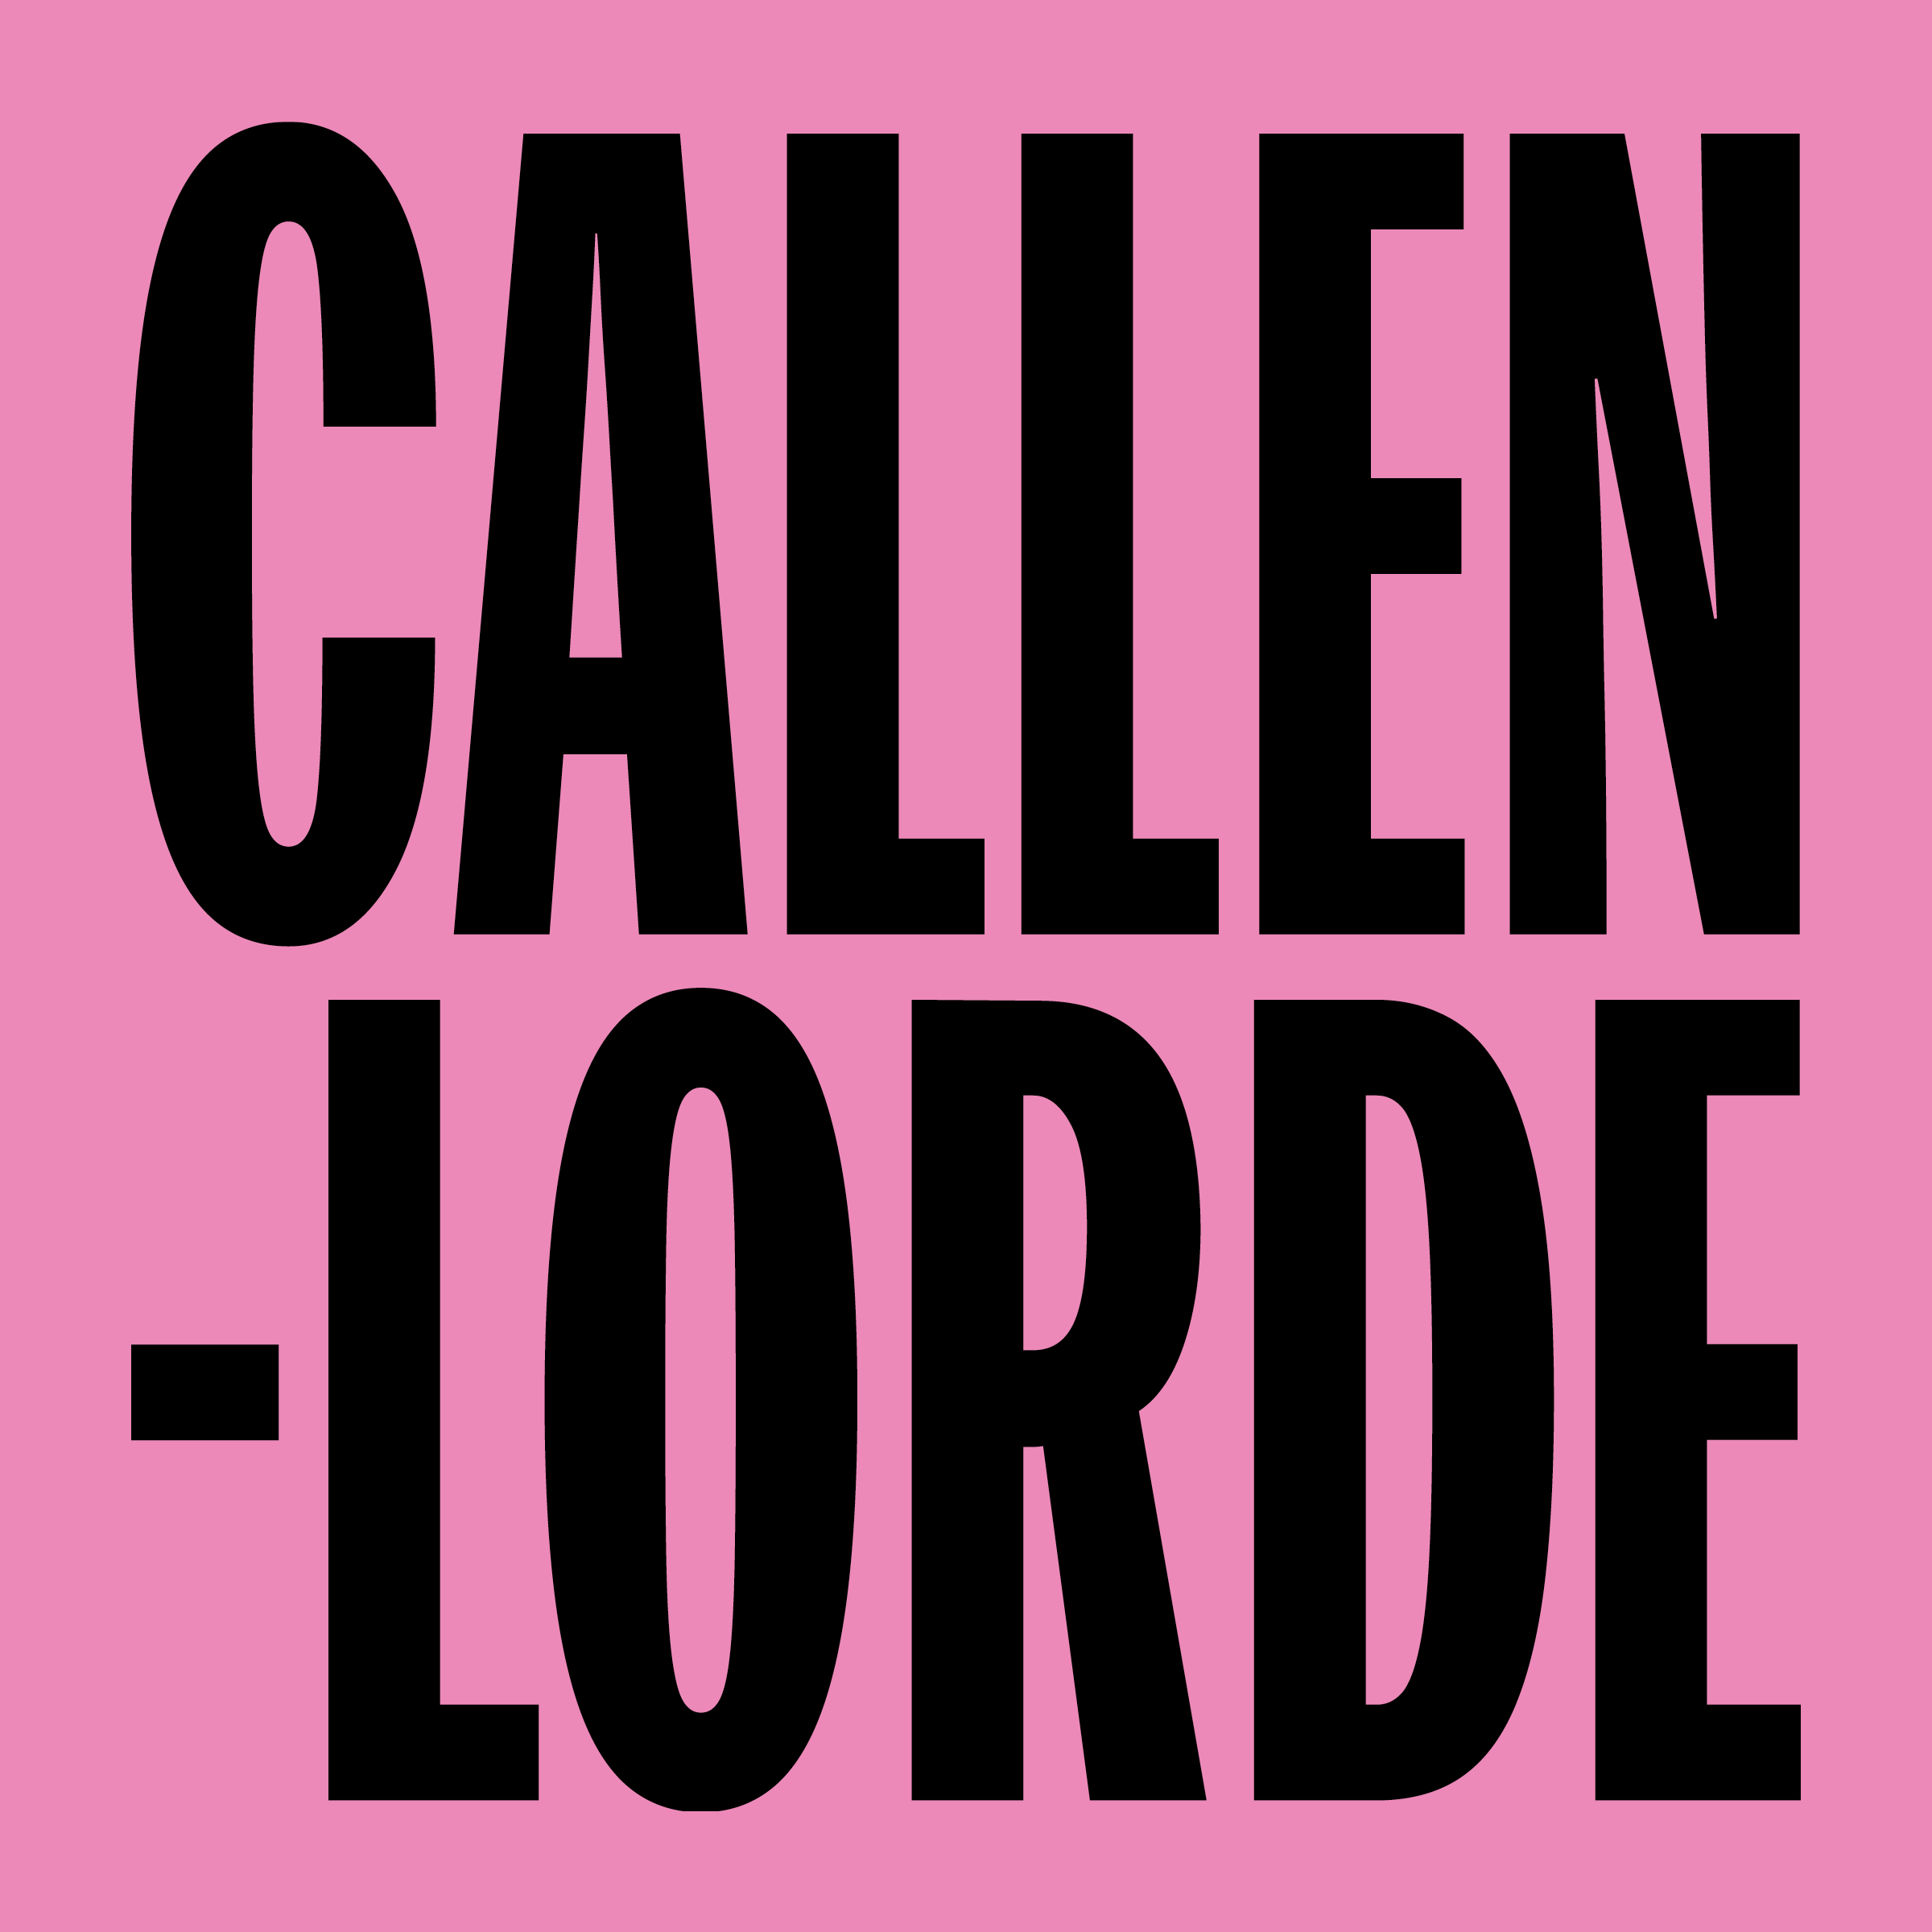 Callen-Lorde Chelsea - New York, NY 10011 - (212)271-7200 | ShowMeLocal.com